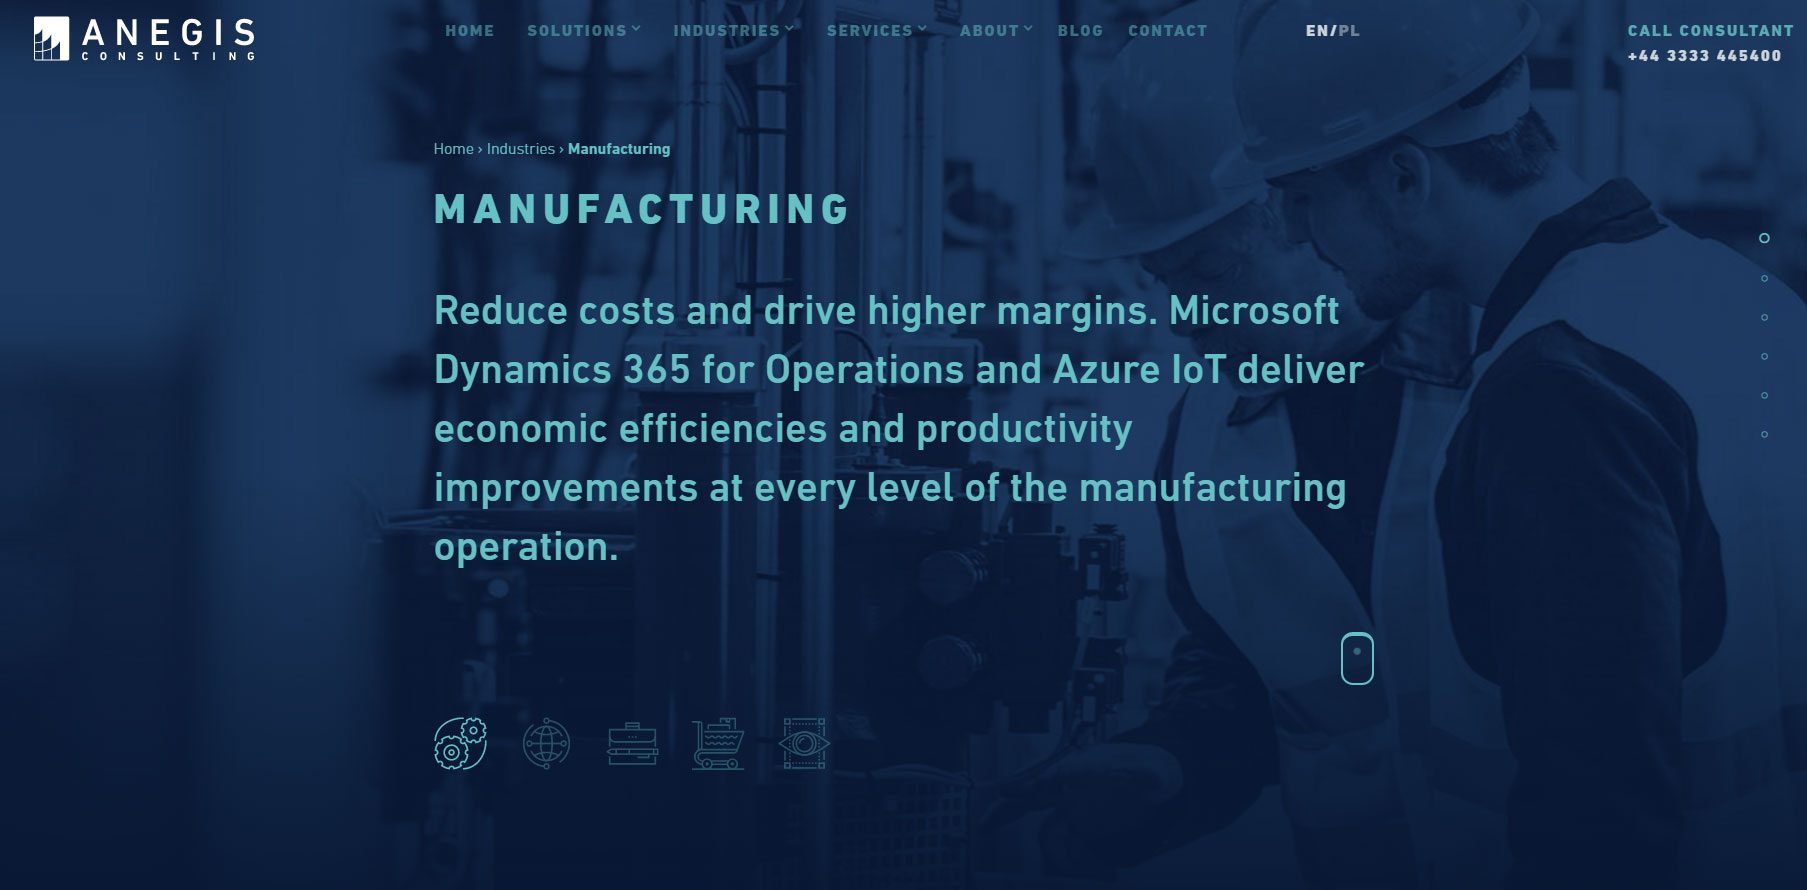 MICROSOFT DYNAMICS PARTNER - Website of the Day